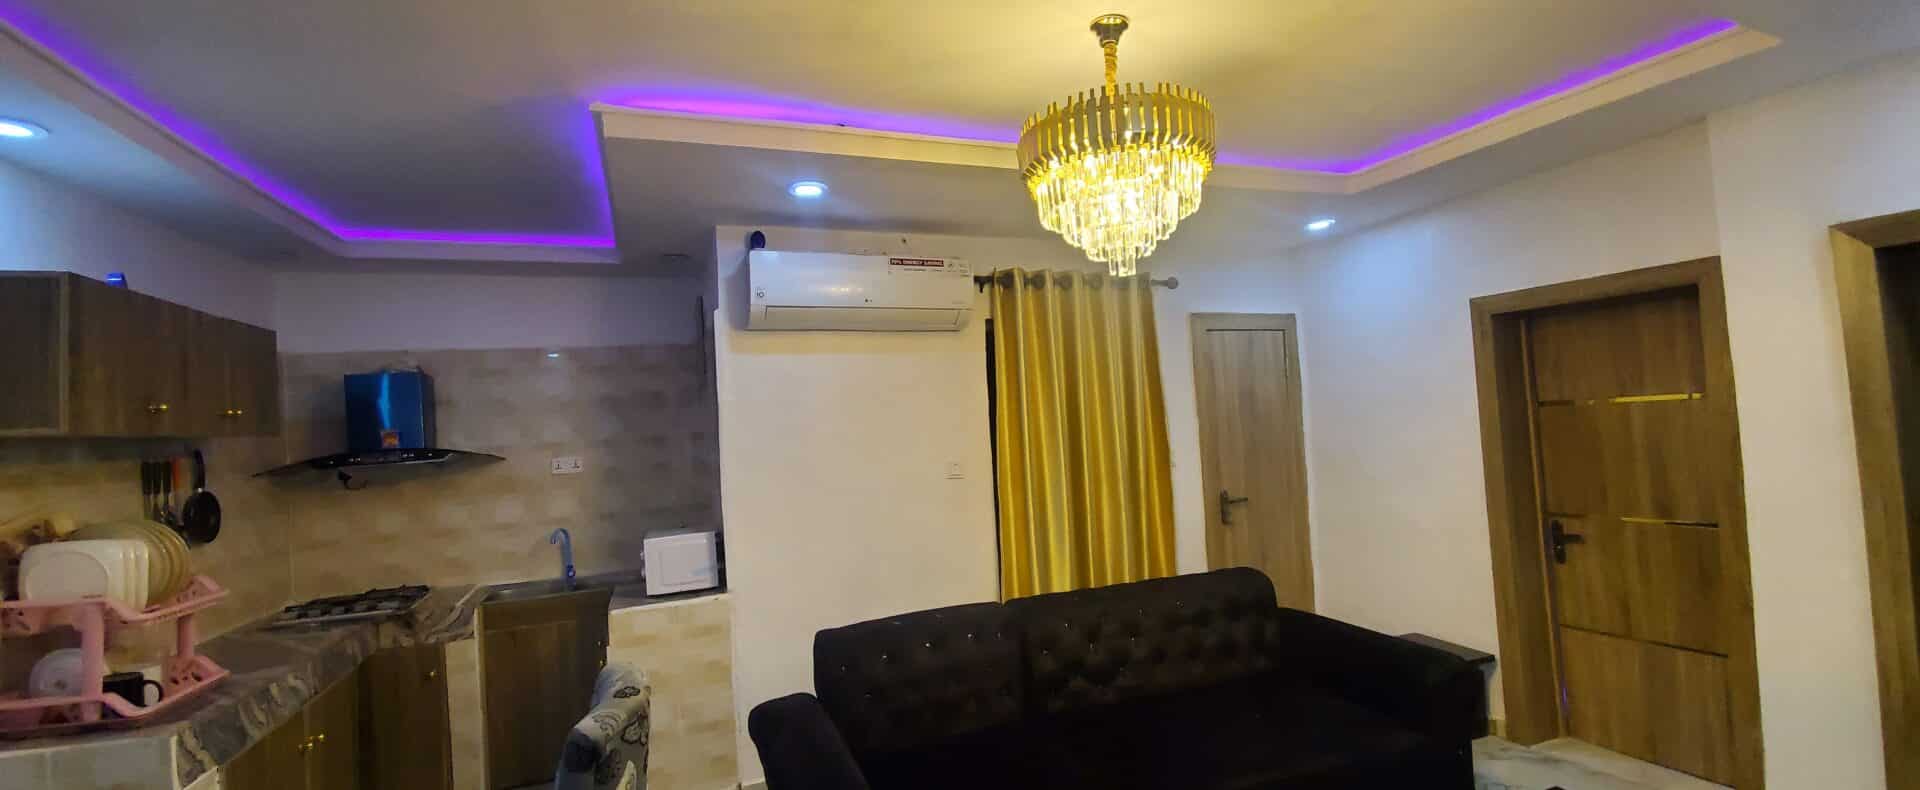 2 Bedroom Furnished Apartment In Surulere